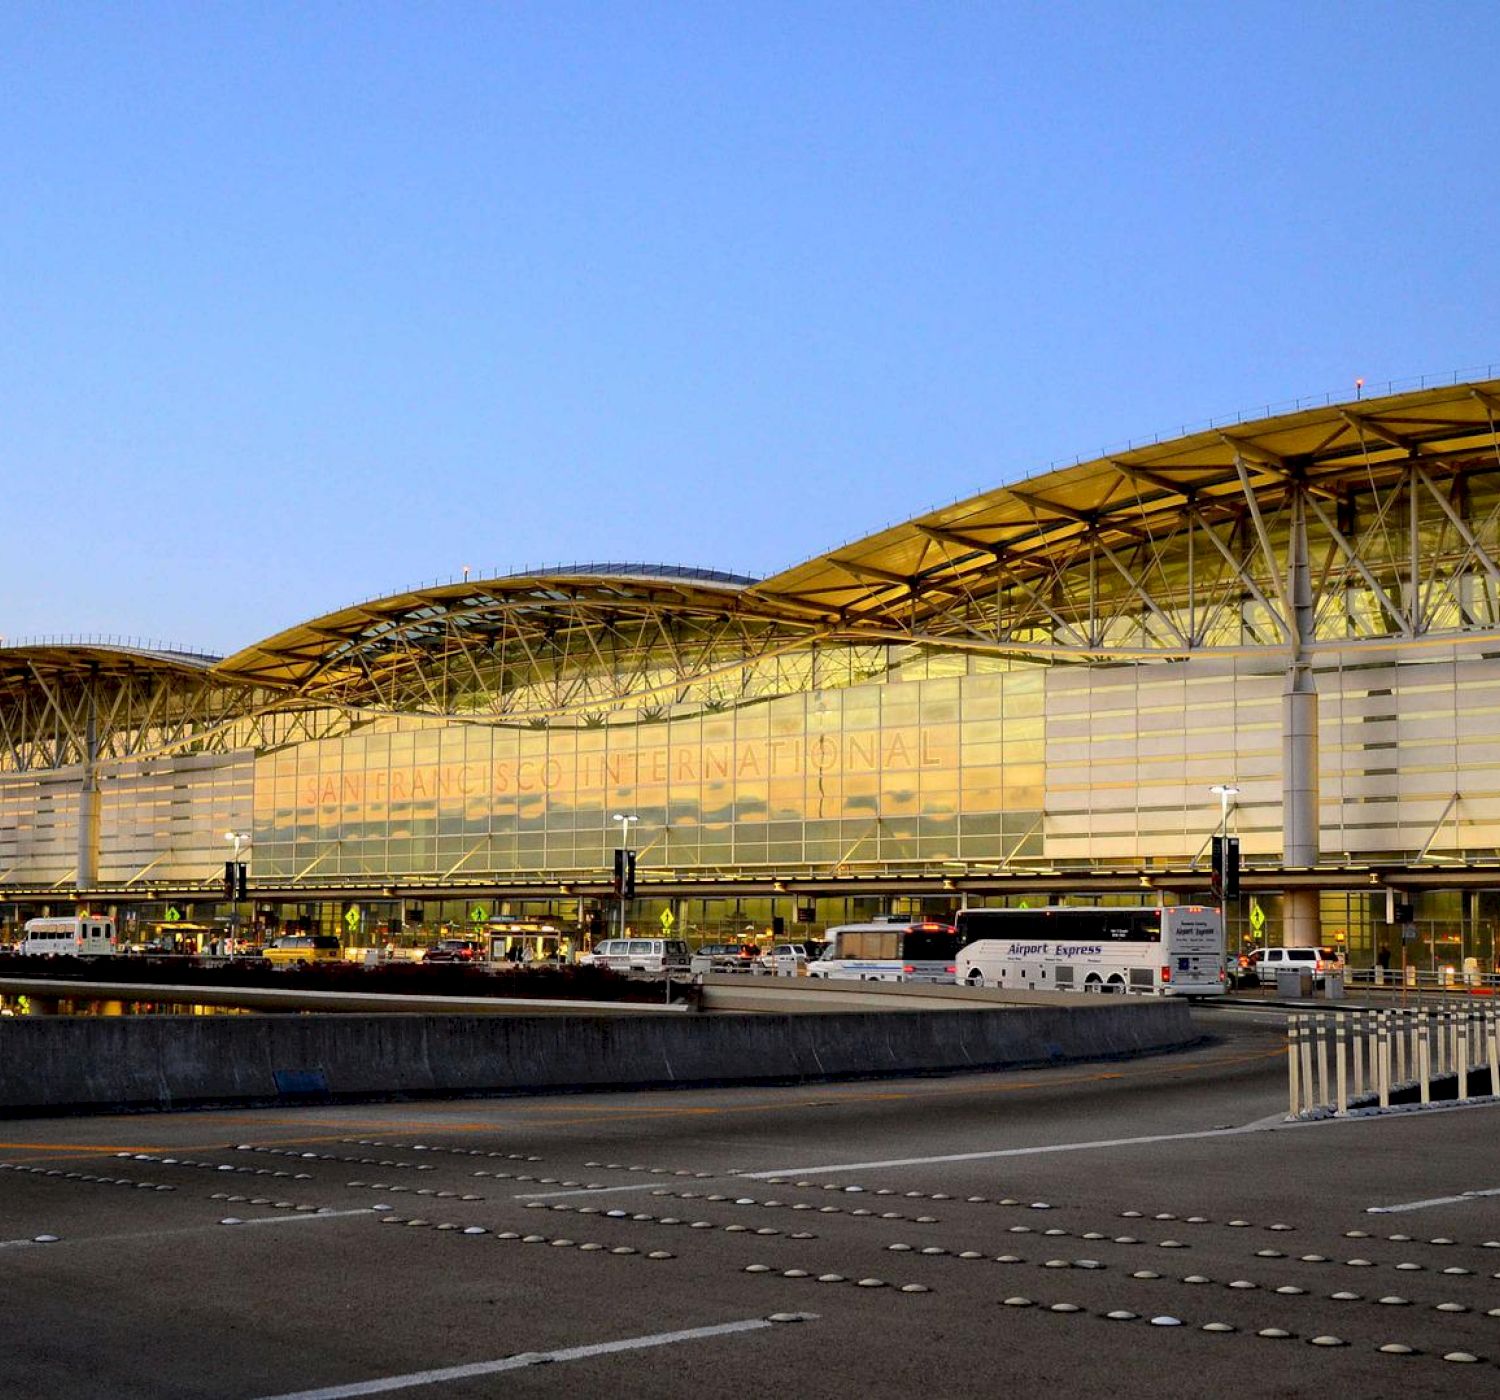 The image shows a modern airport terminal with a wavy roof, large windows, and a roadway in the foreground. There are vehicles and people near the entrance.